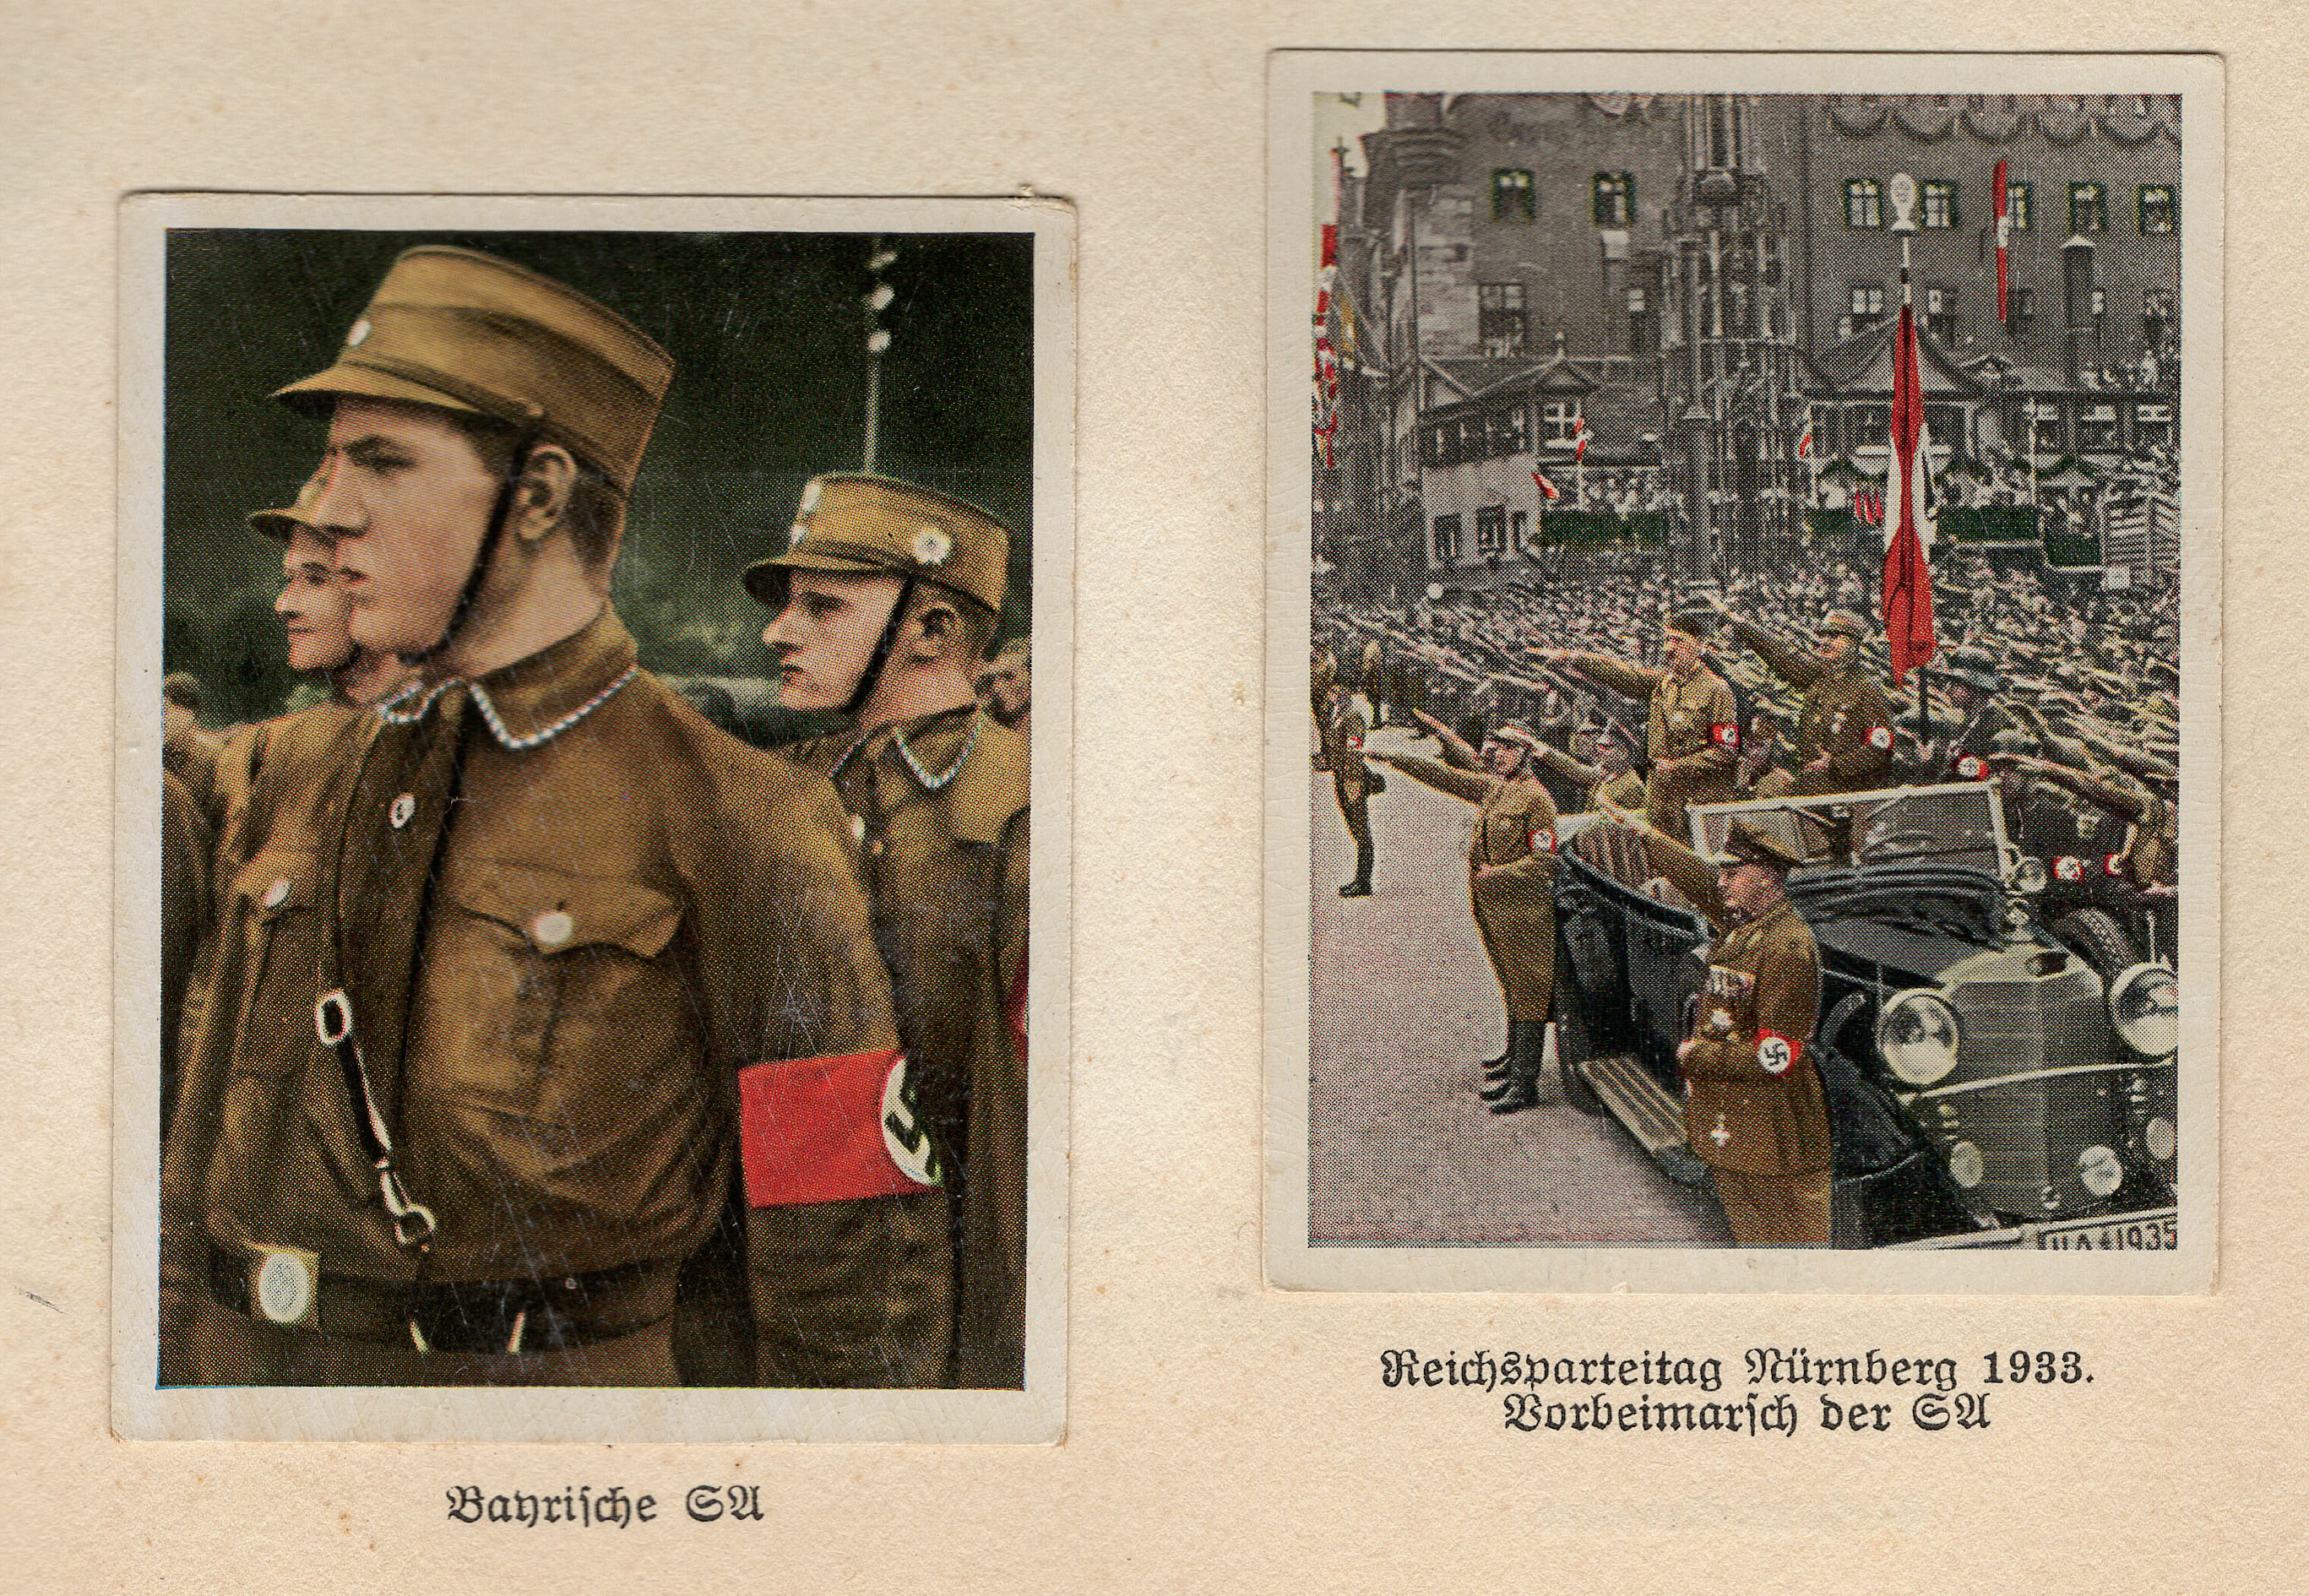 A detail shot of two collectable cards pasted into a book. The book’s text is in German, with a highly angular Gothic font. The left image is a close-up of a Nazi brownshirt. The right image shows a large crowd performing the Nazi salute, with Adolf Hitler also giving the salute, standing in front of the crowd in a convertible car.